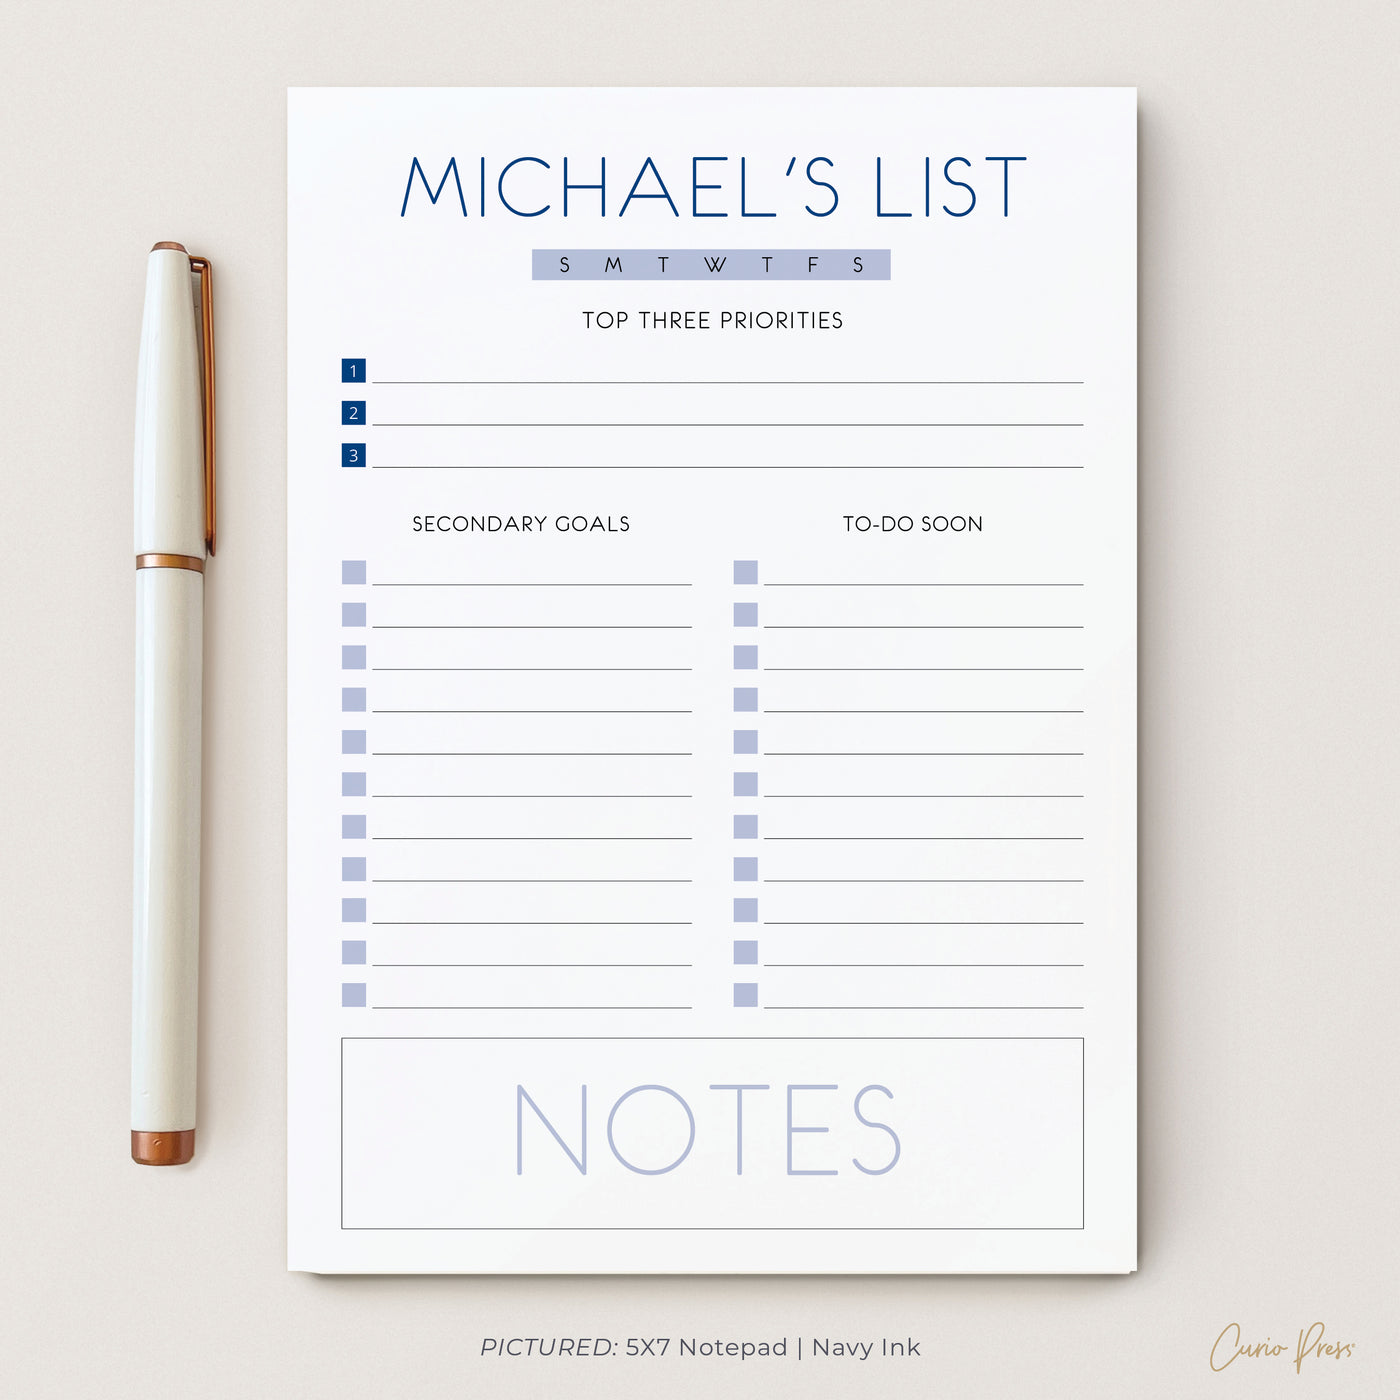 Today's List: Notepad